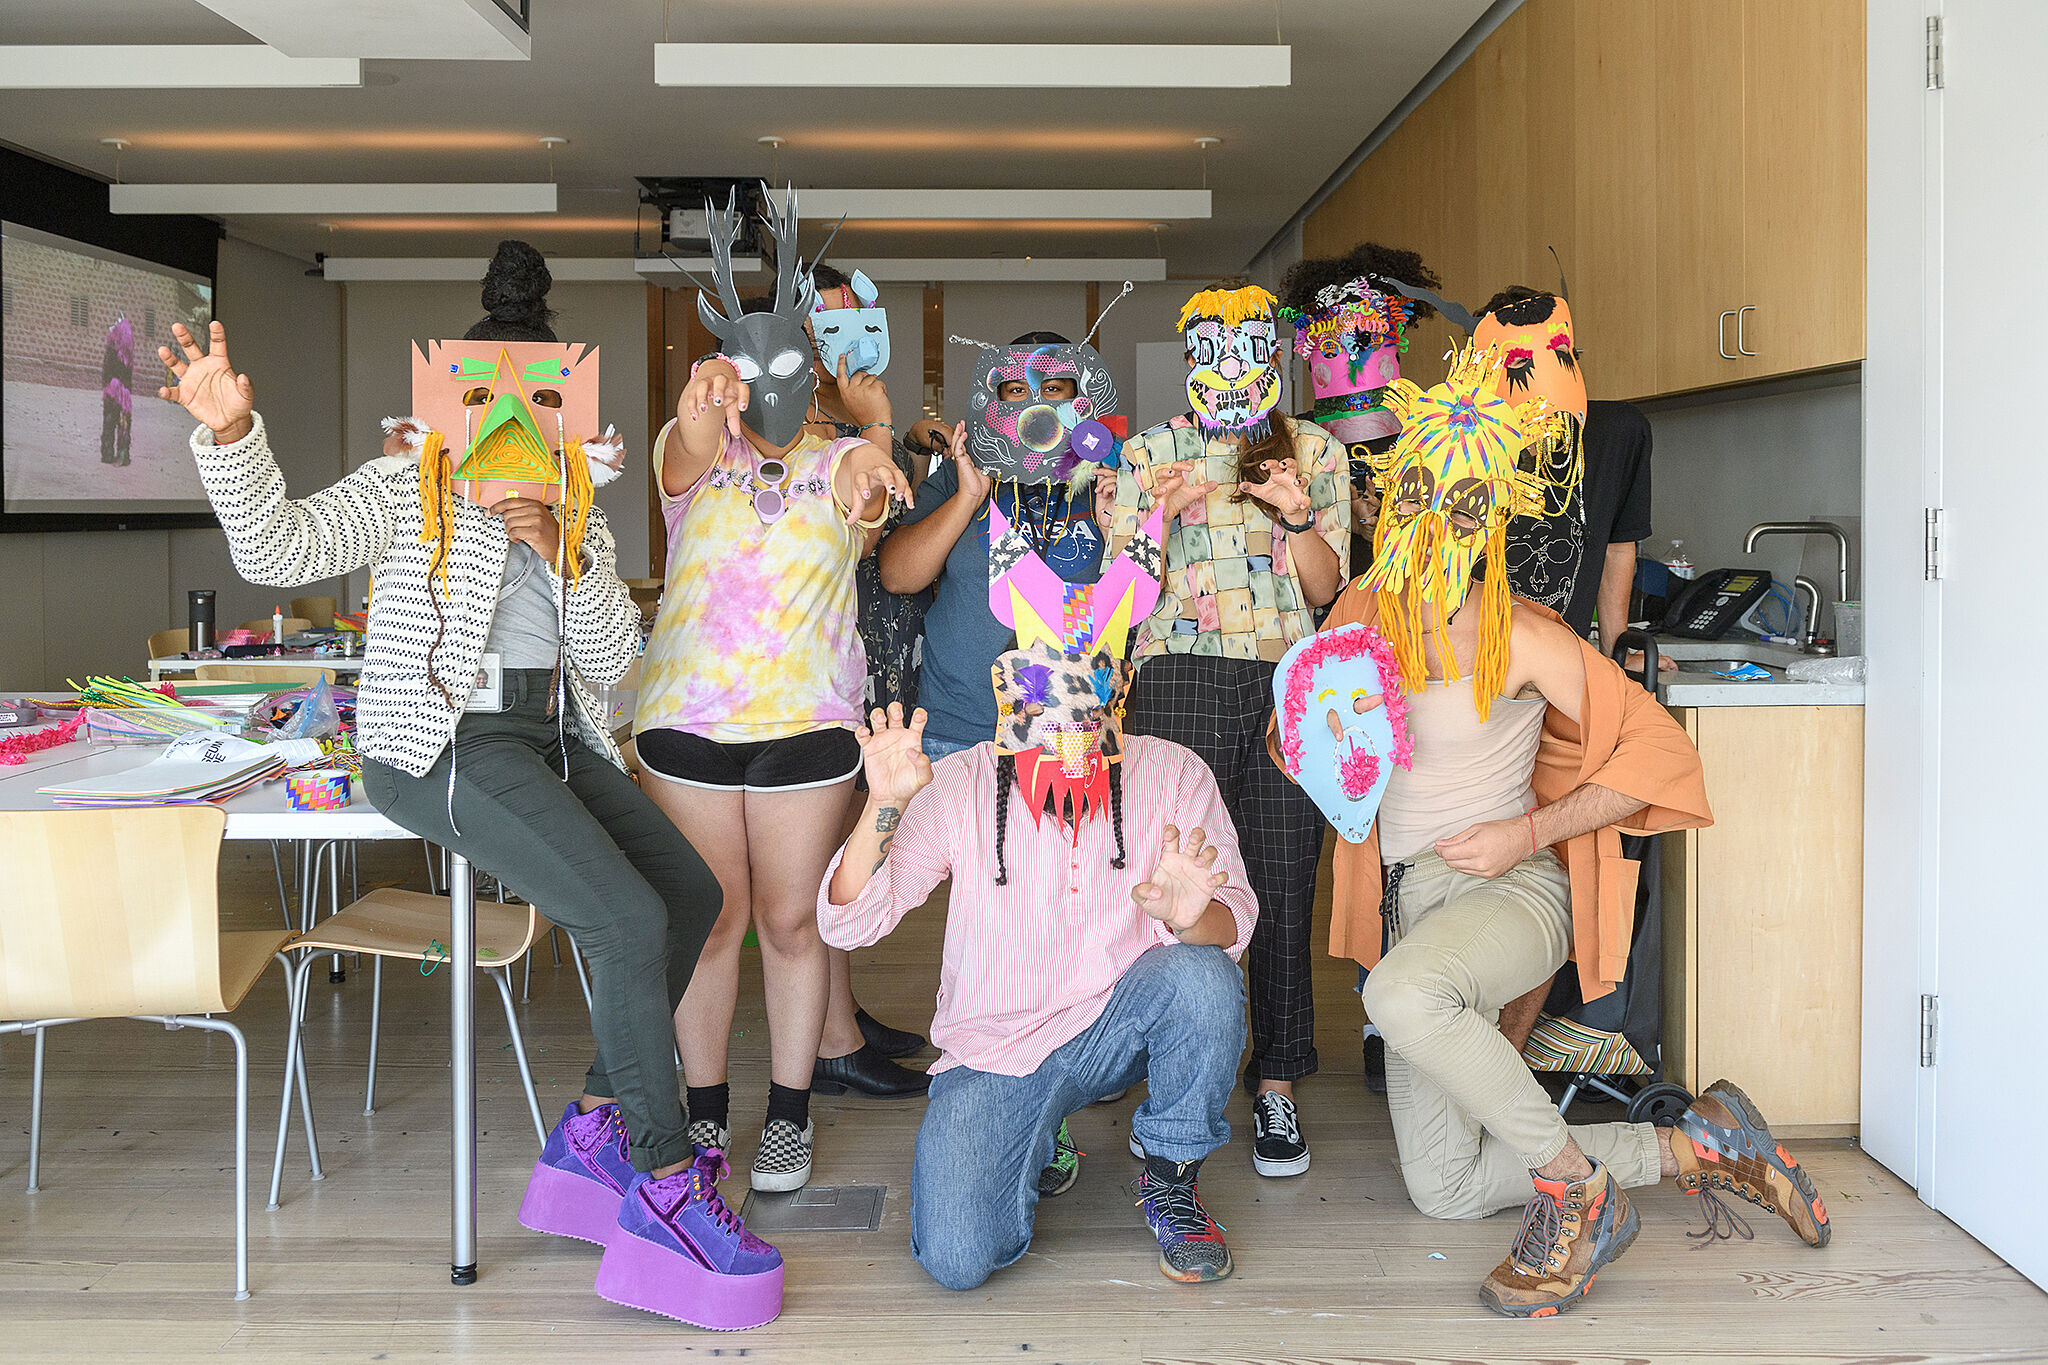 A group of nine people pose for a group photo, wearing handmade paper masks